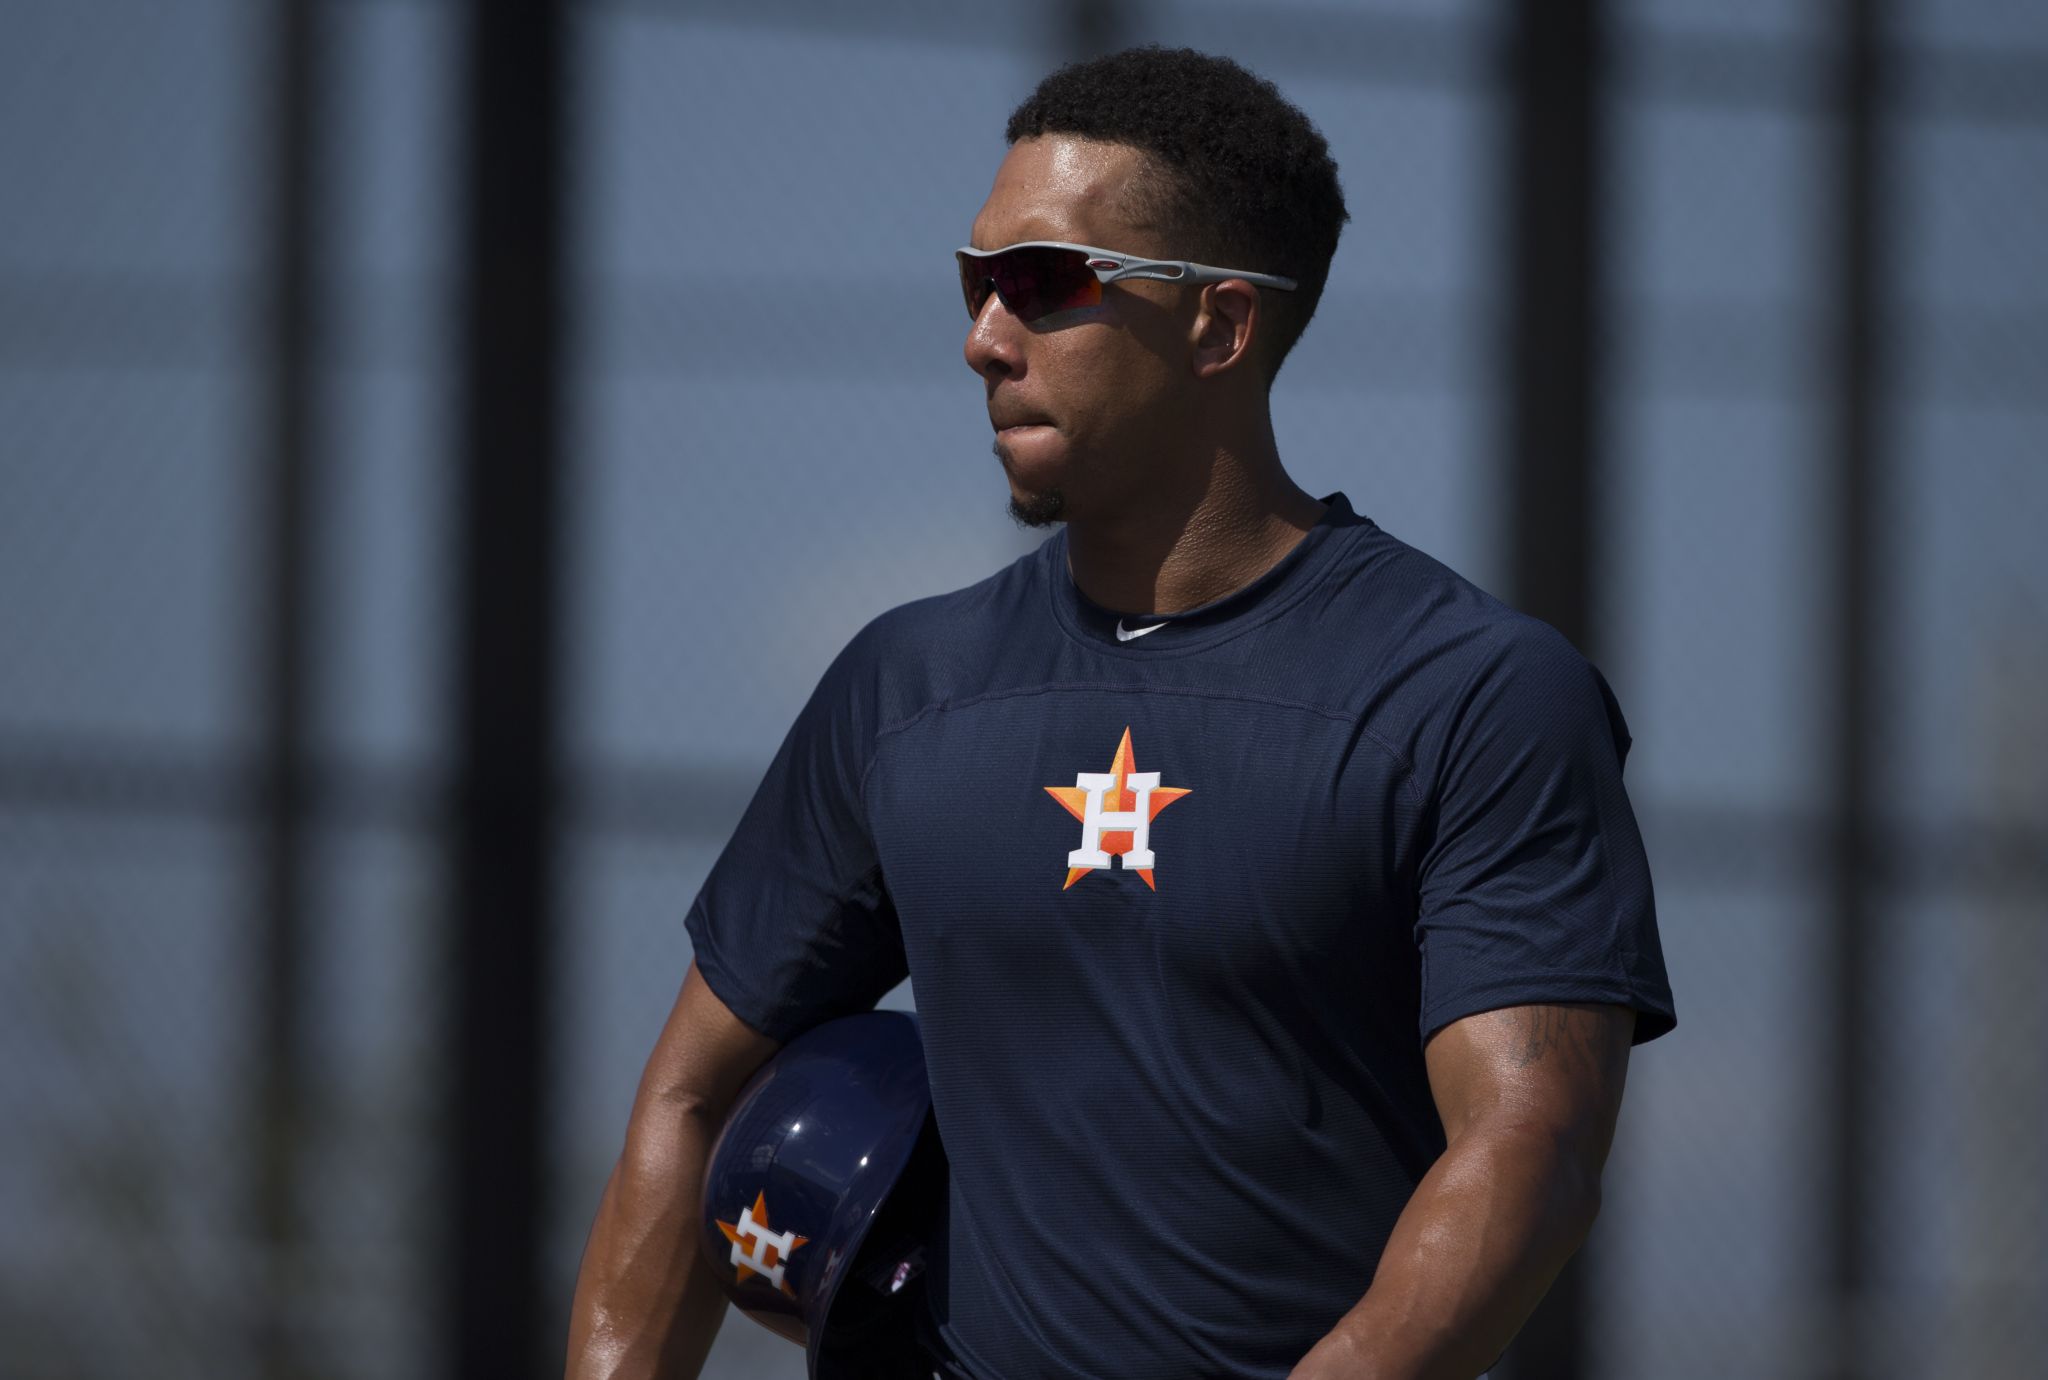 New Astro Michael Brantley lets his play do the talking